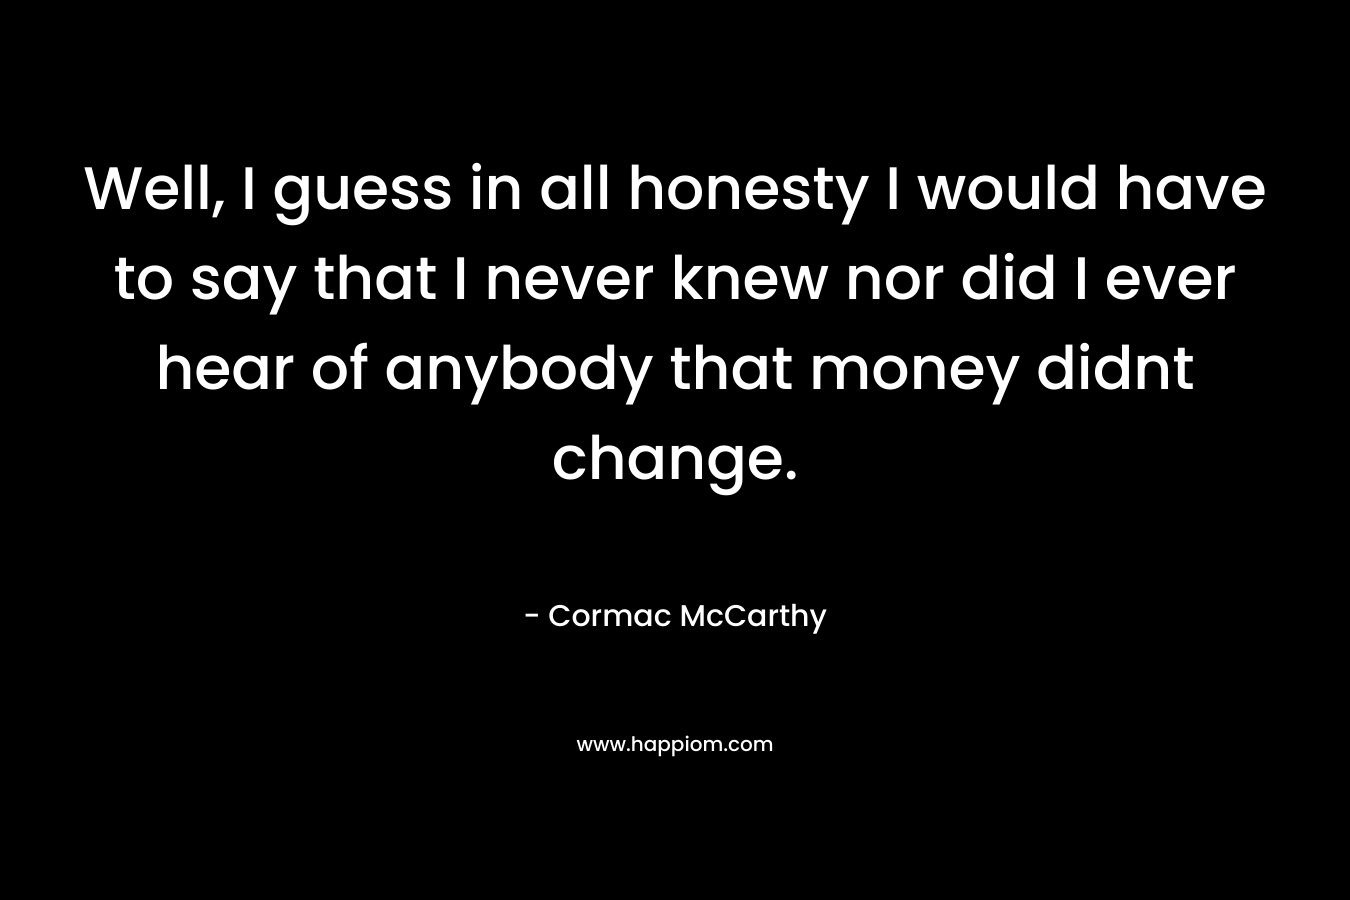 Well, I guess in all honesty I would have to say that I never knew nor did I ever hear of anybody that money didnt change.